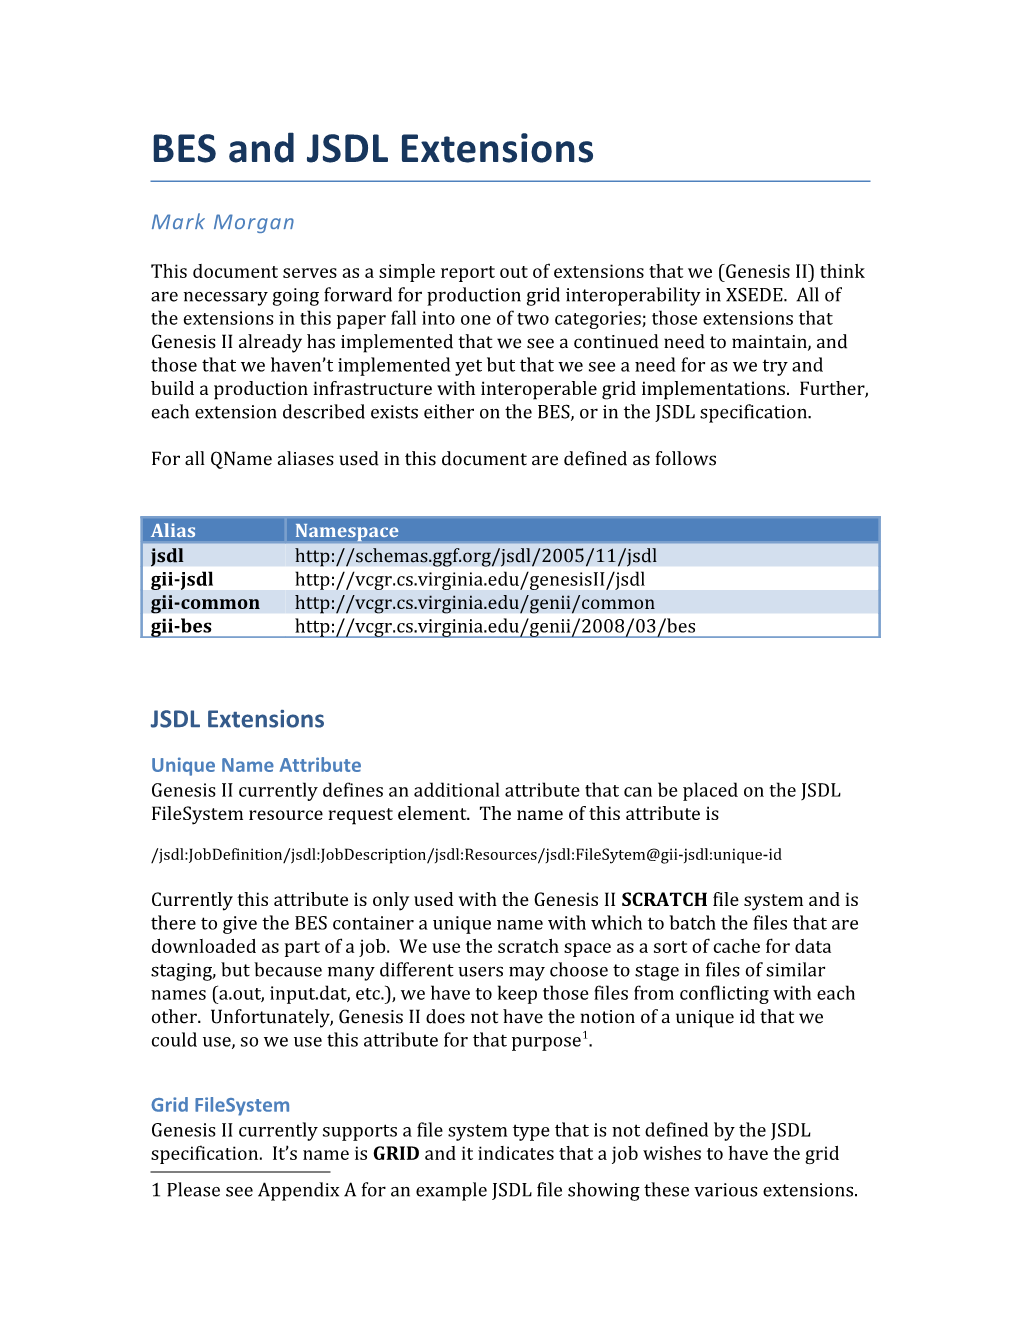 BES and JSDL Extensions